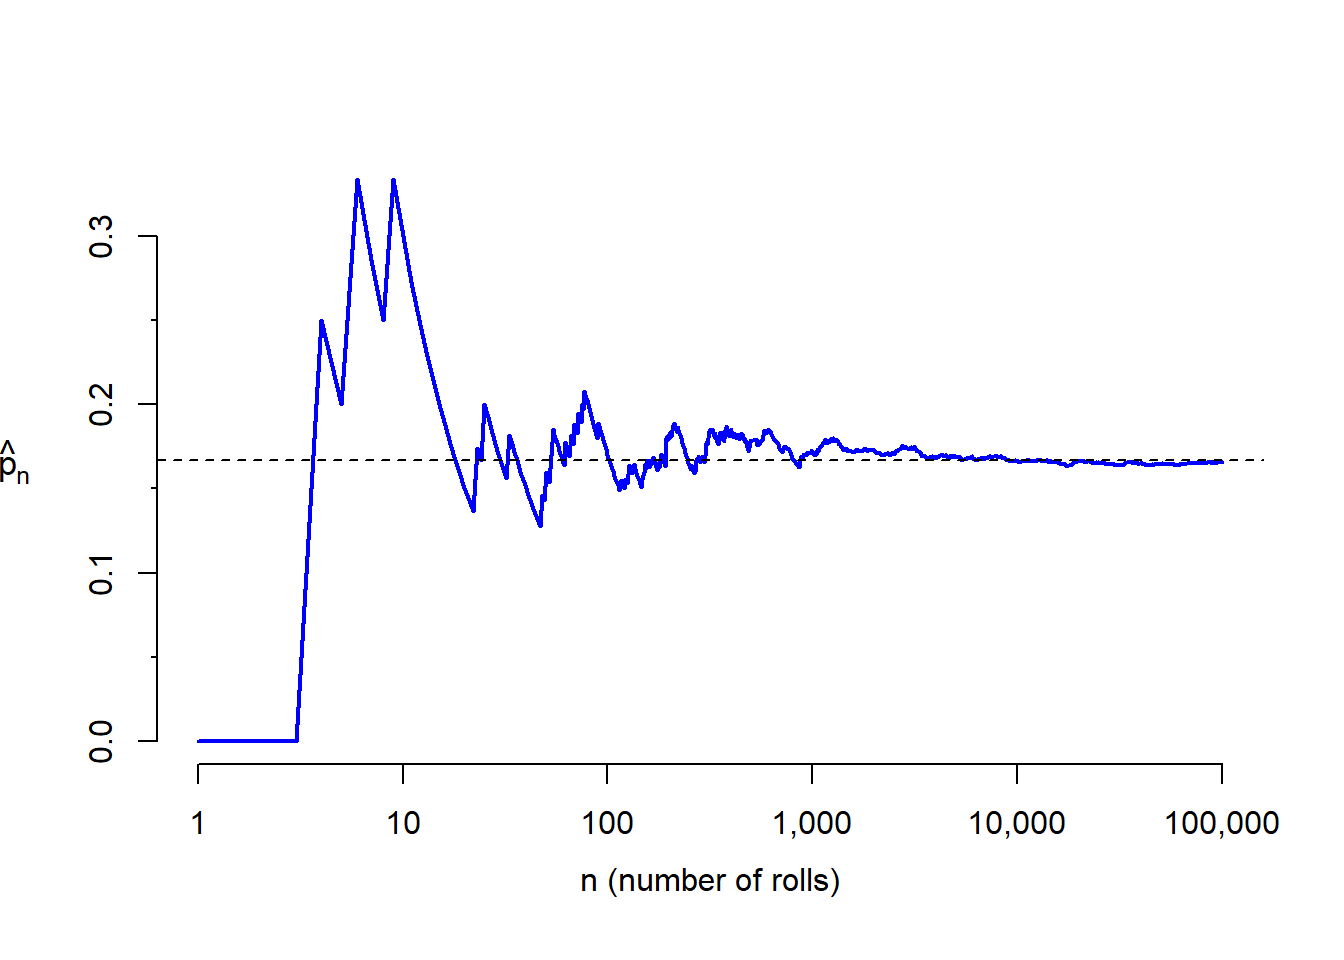 The fraction of die rolls that are 1 at each stage in a simulation. The proportion tends to get closer to the probability $1/6 \approx 0.167$ as the number of rolls increases.